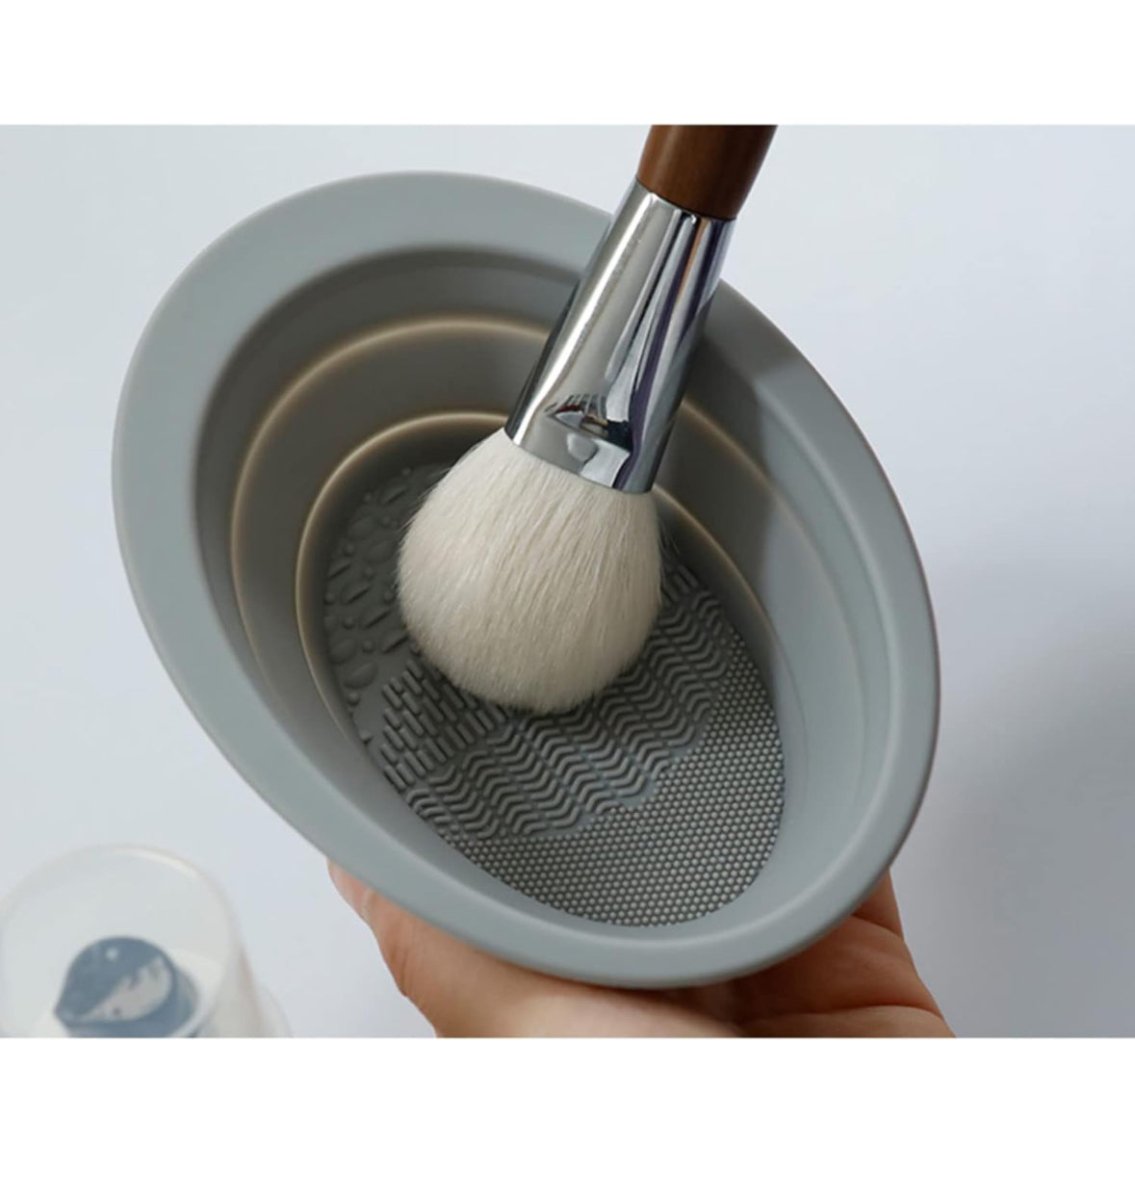 Mask Brush Cleaning Bowl, Collapsible Silicone Bowl